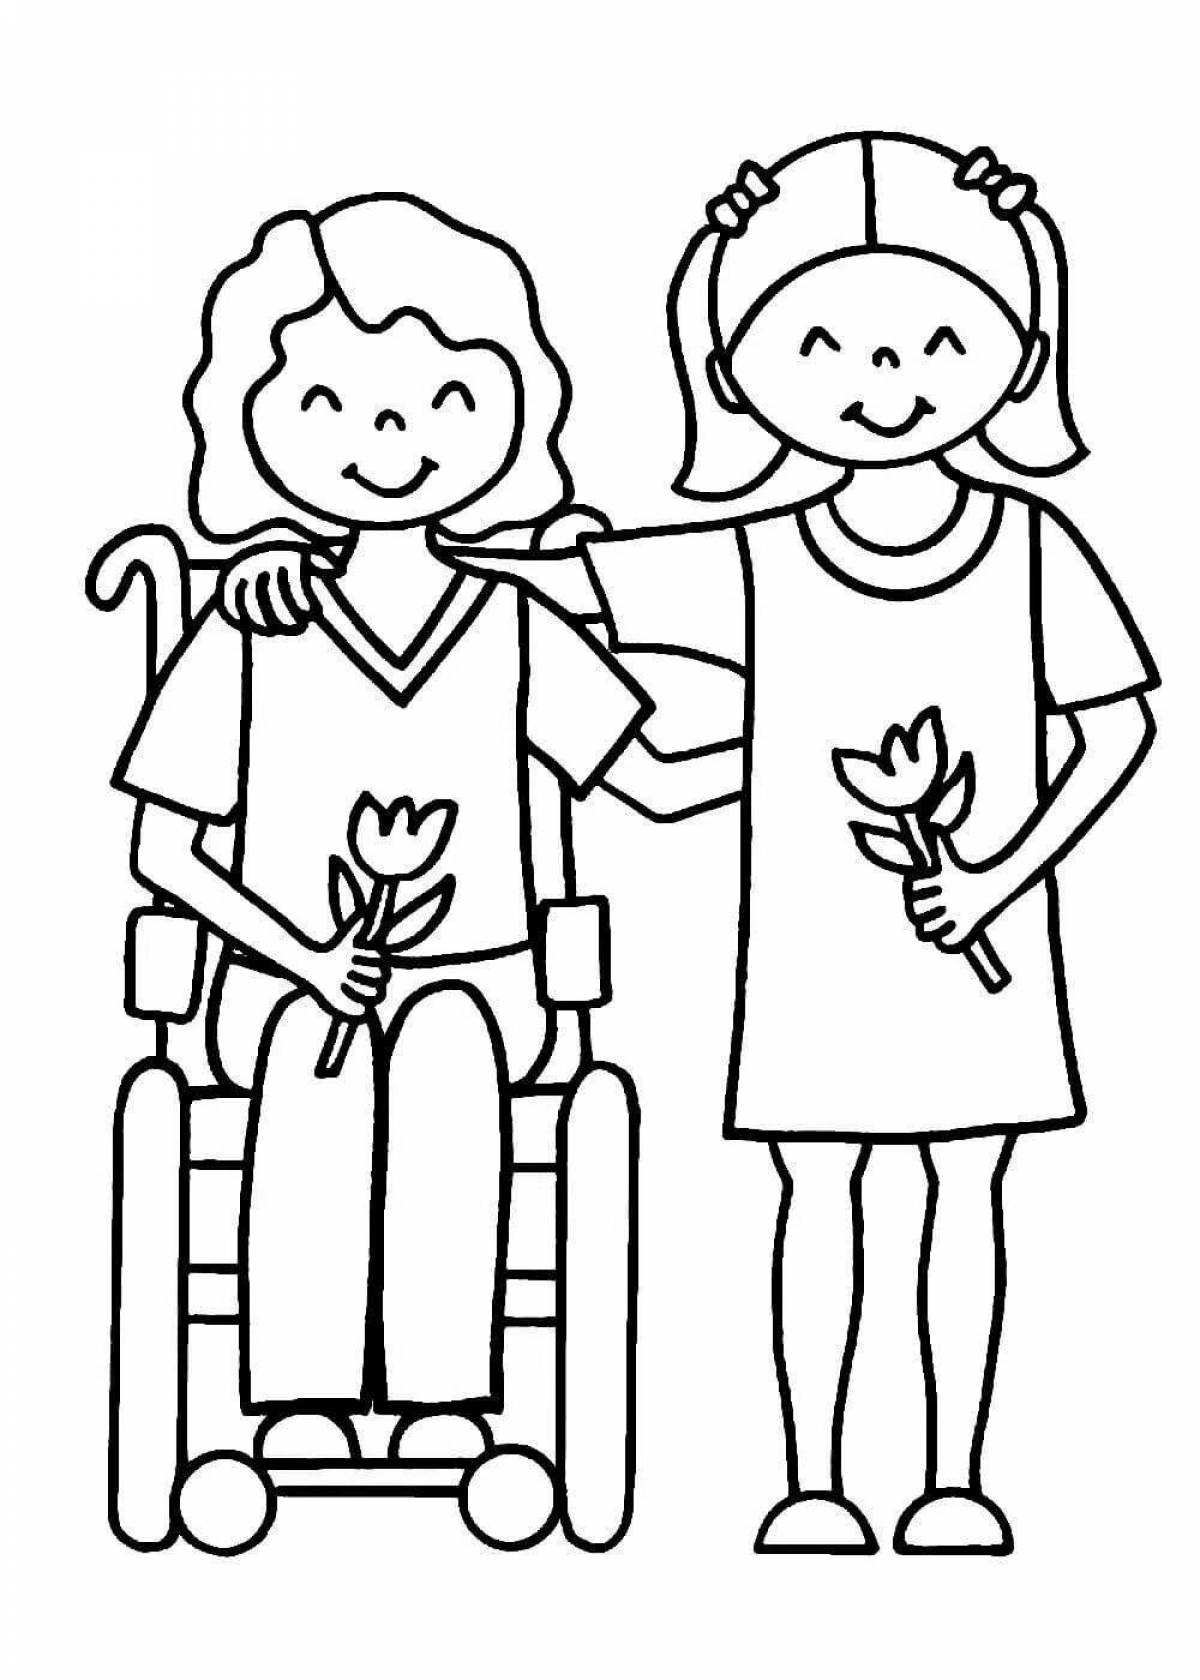 Brilliant kindness coloring page